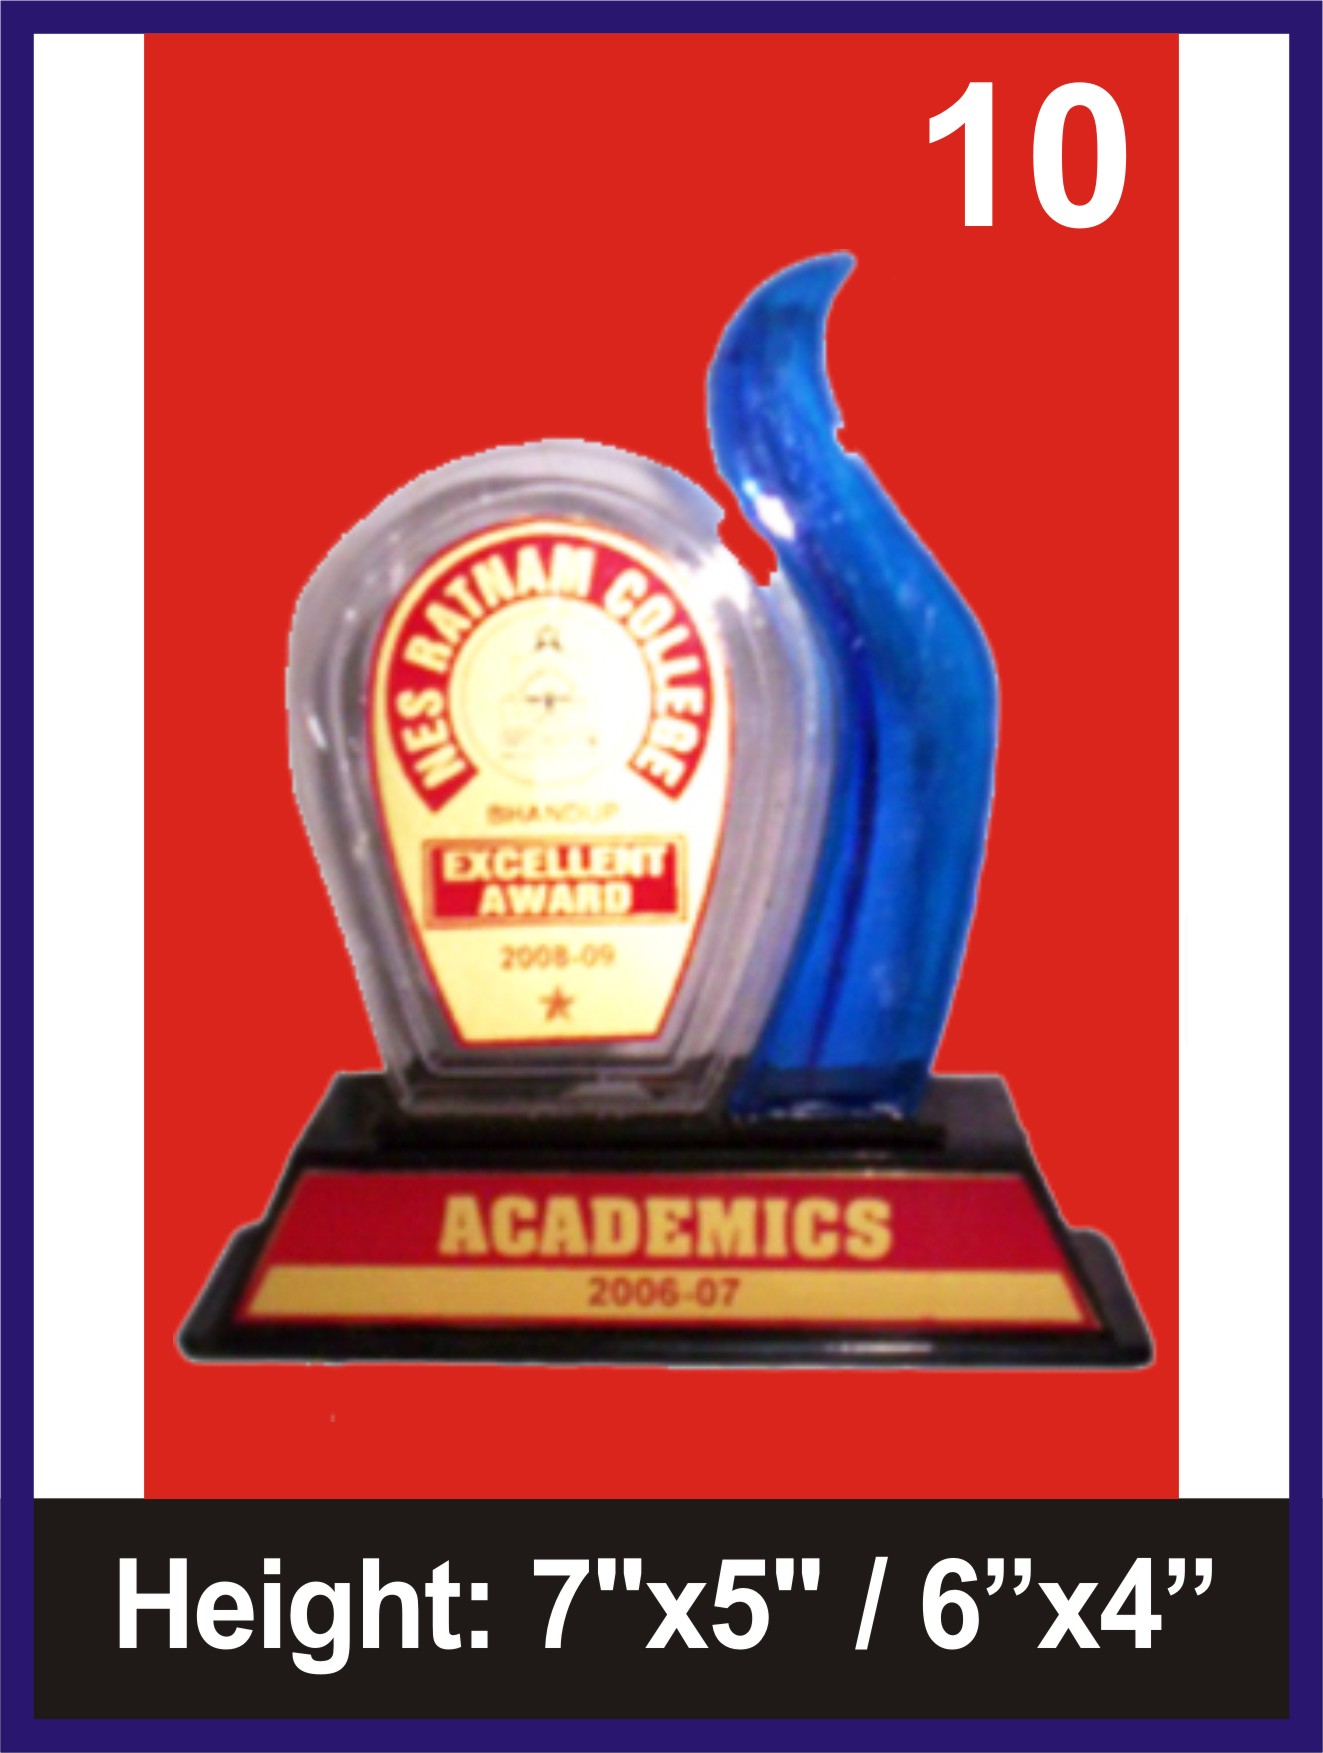 Manufacturers of ACRYLIC TROPHIES in Mumbai